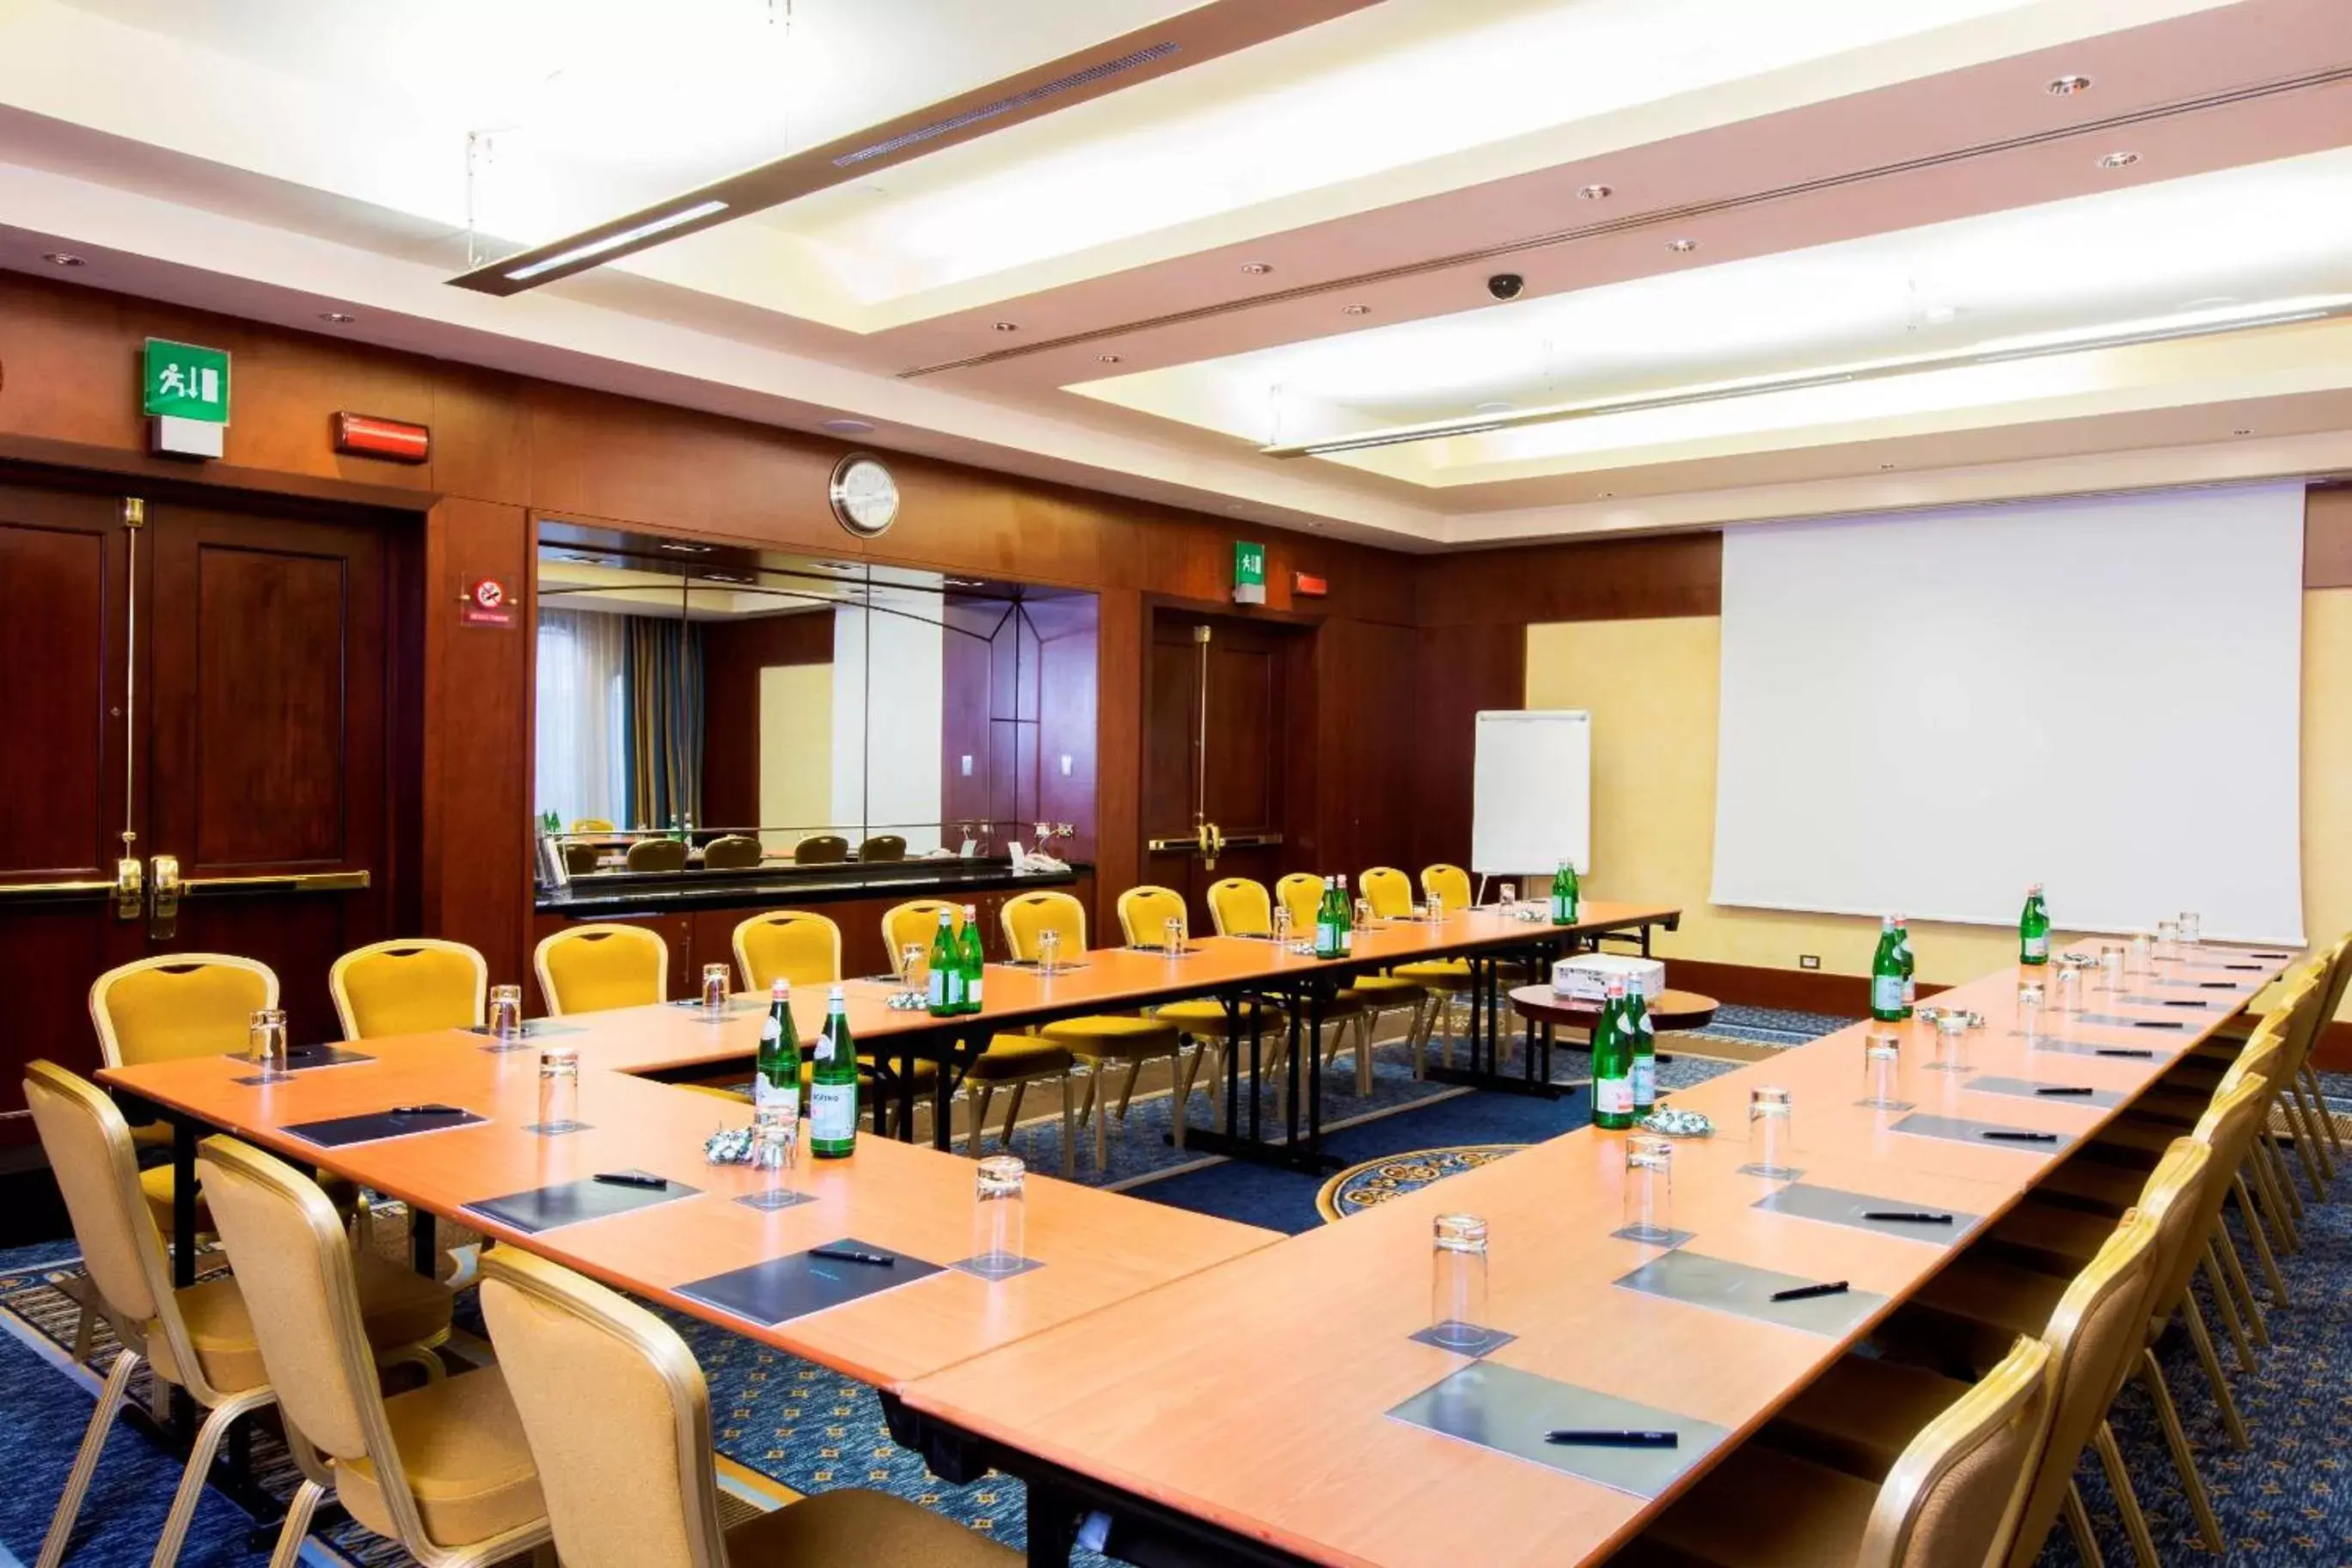 Meeting/conference room in Hilton Molino Stucky Venice